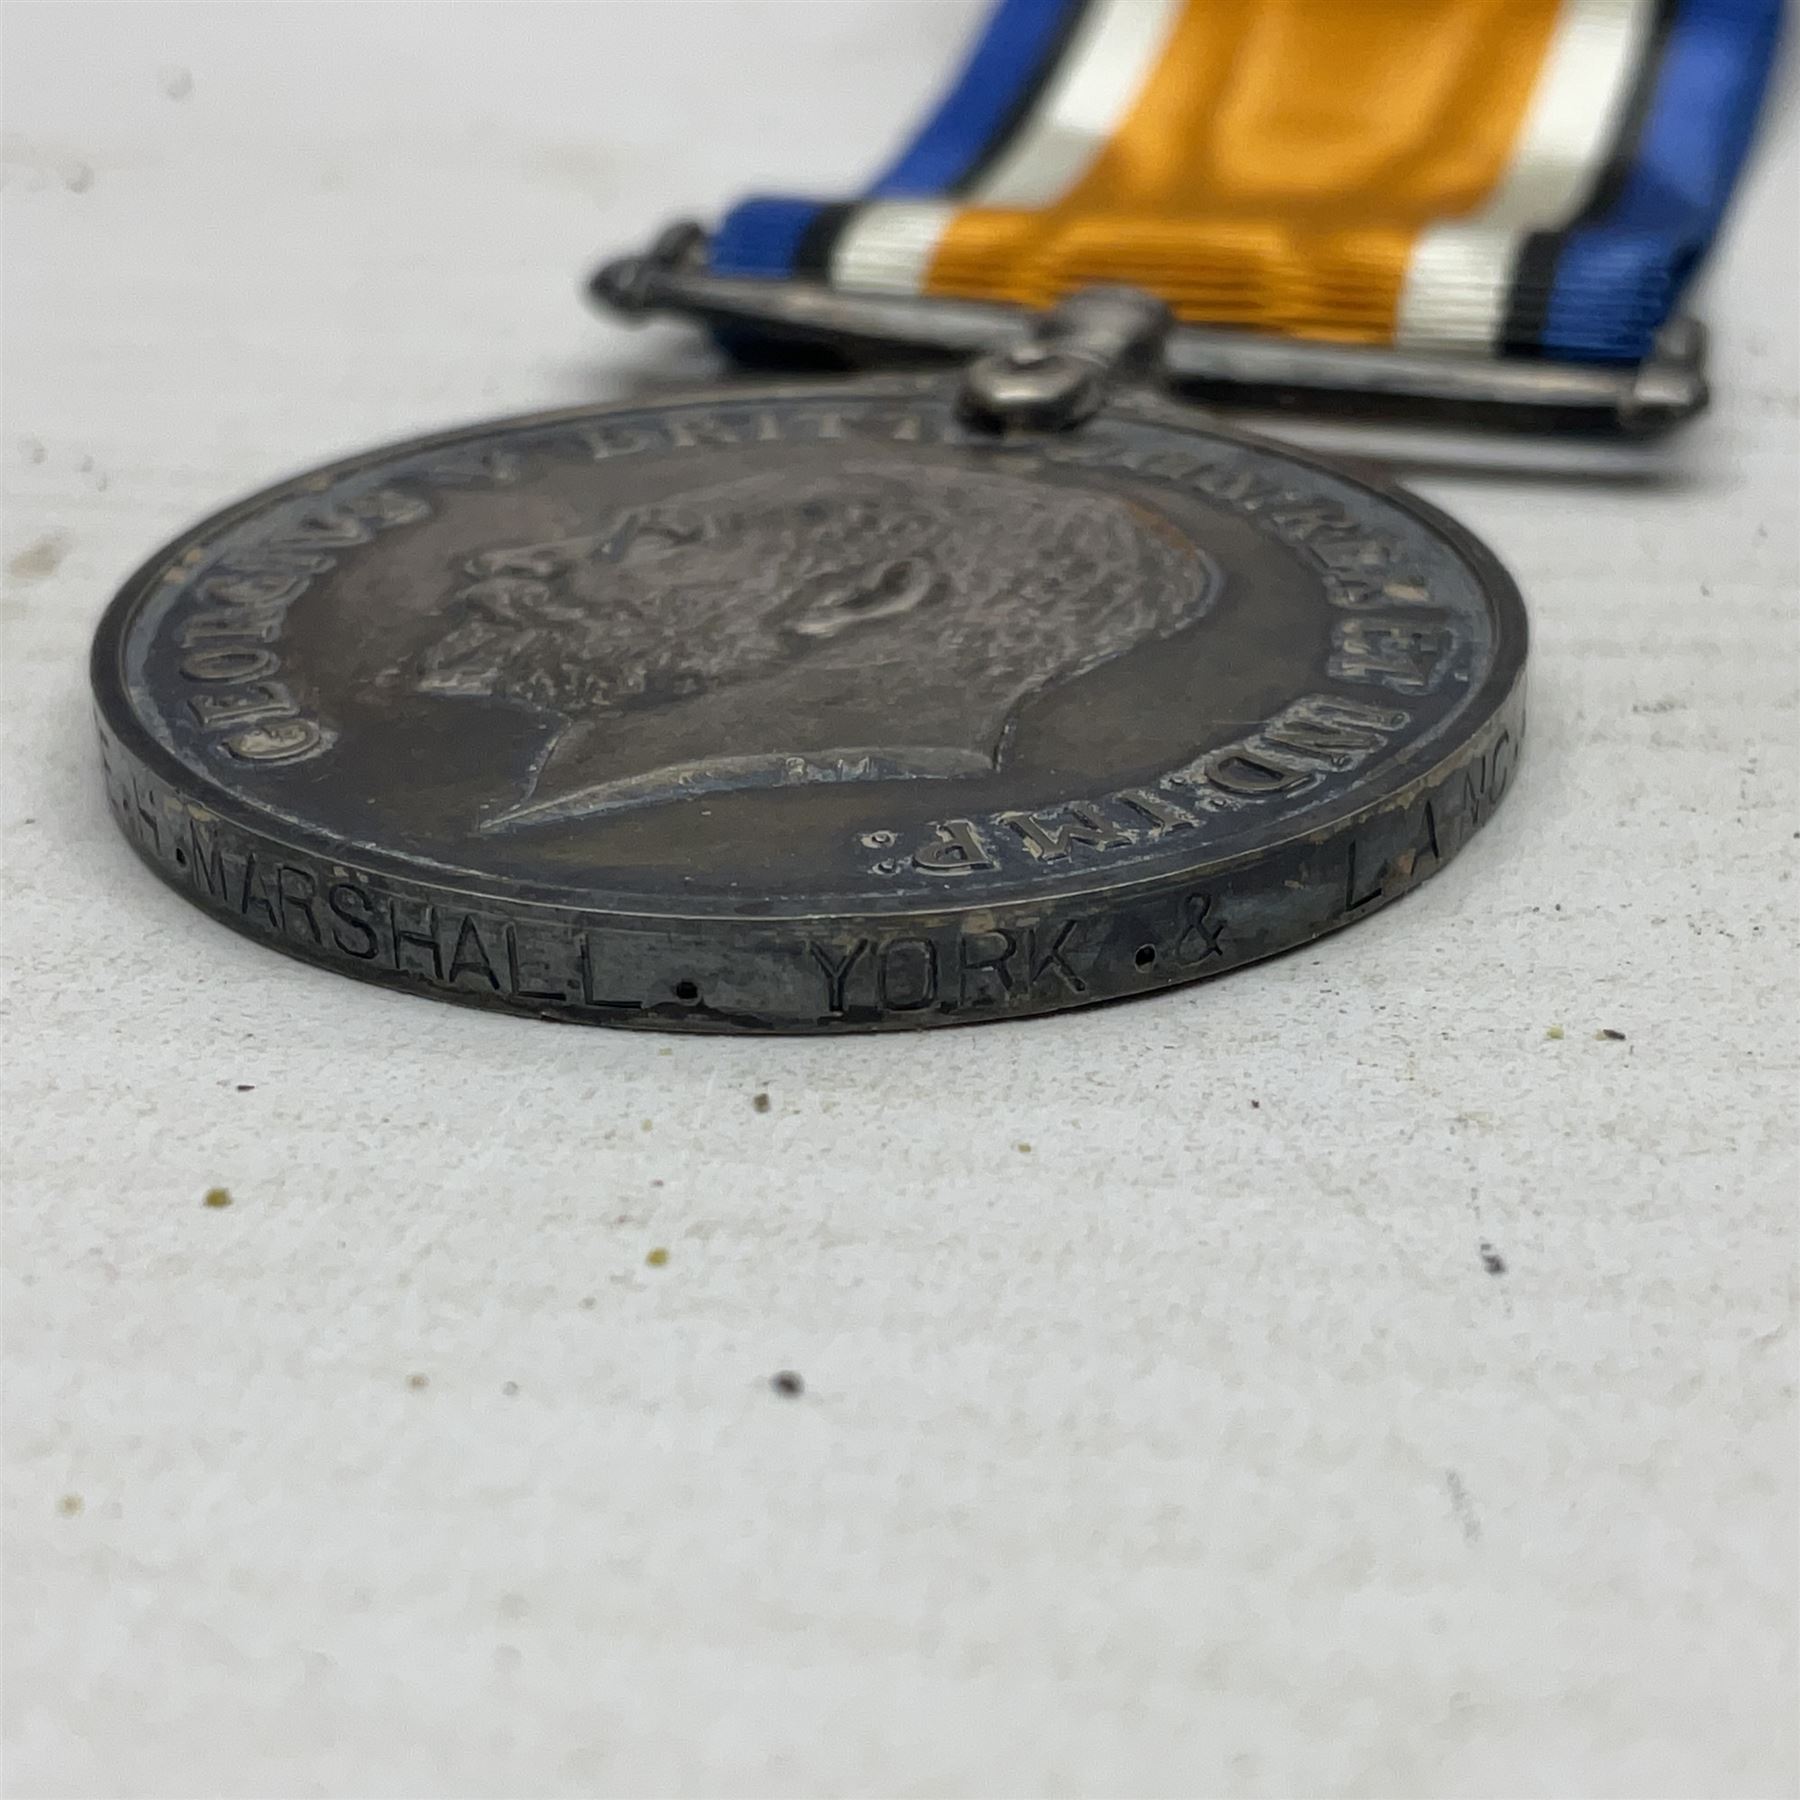 WWI pair of medals comprising British War Medal and Victory Medal awarded to 12-1379 Pte. H. Marshal - Image 8 of 18